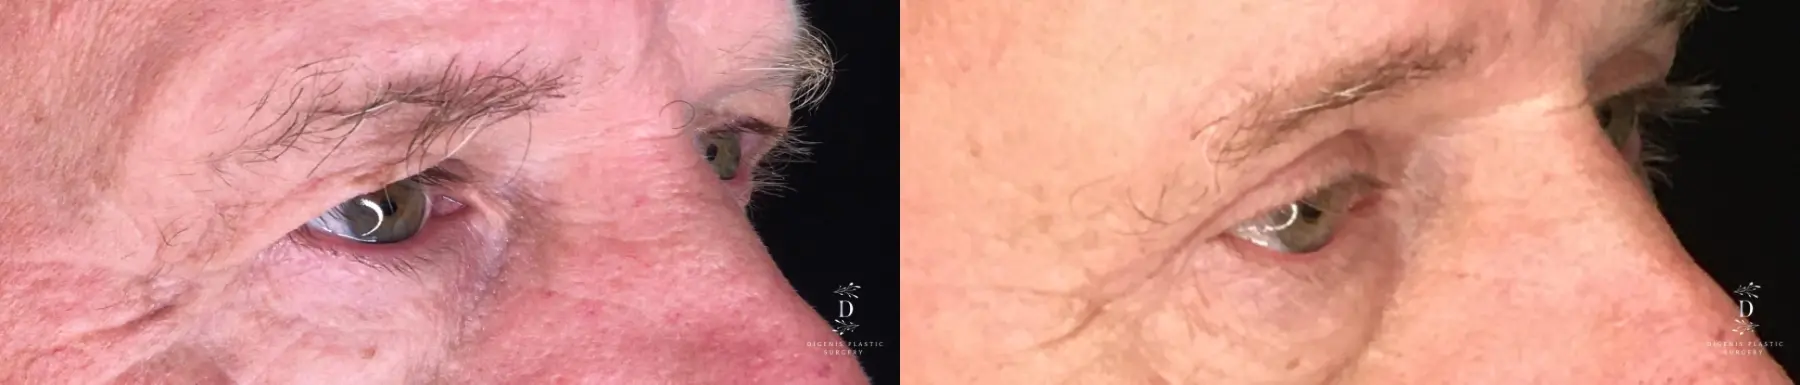 Eyelid Surgery: Patient 31 - Before and After 2